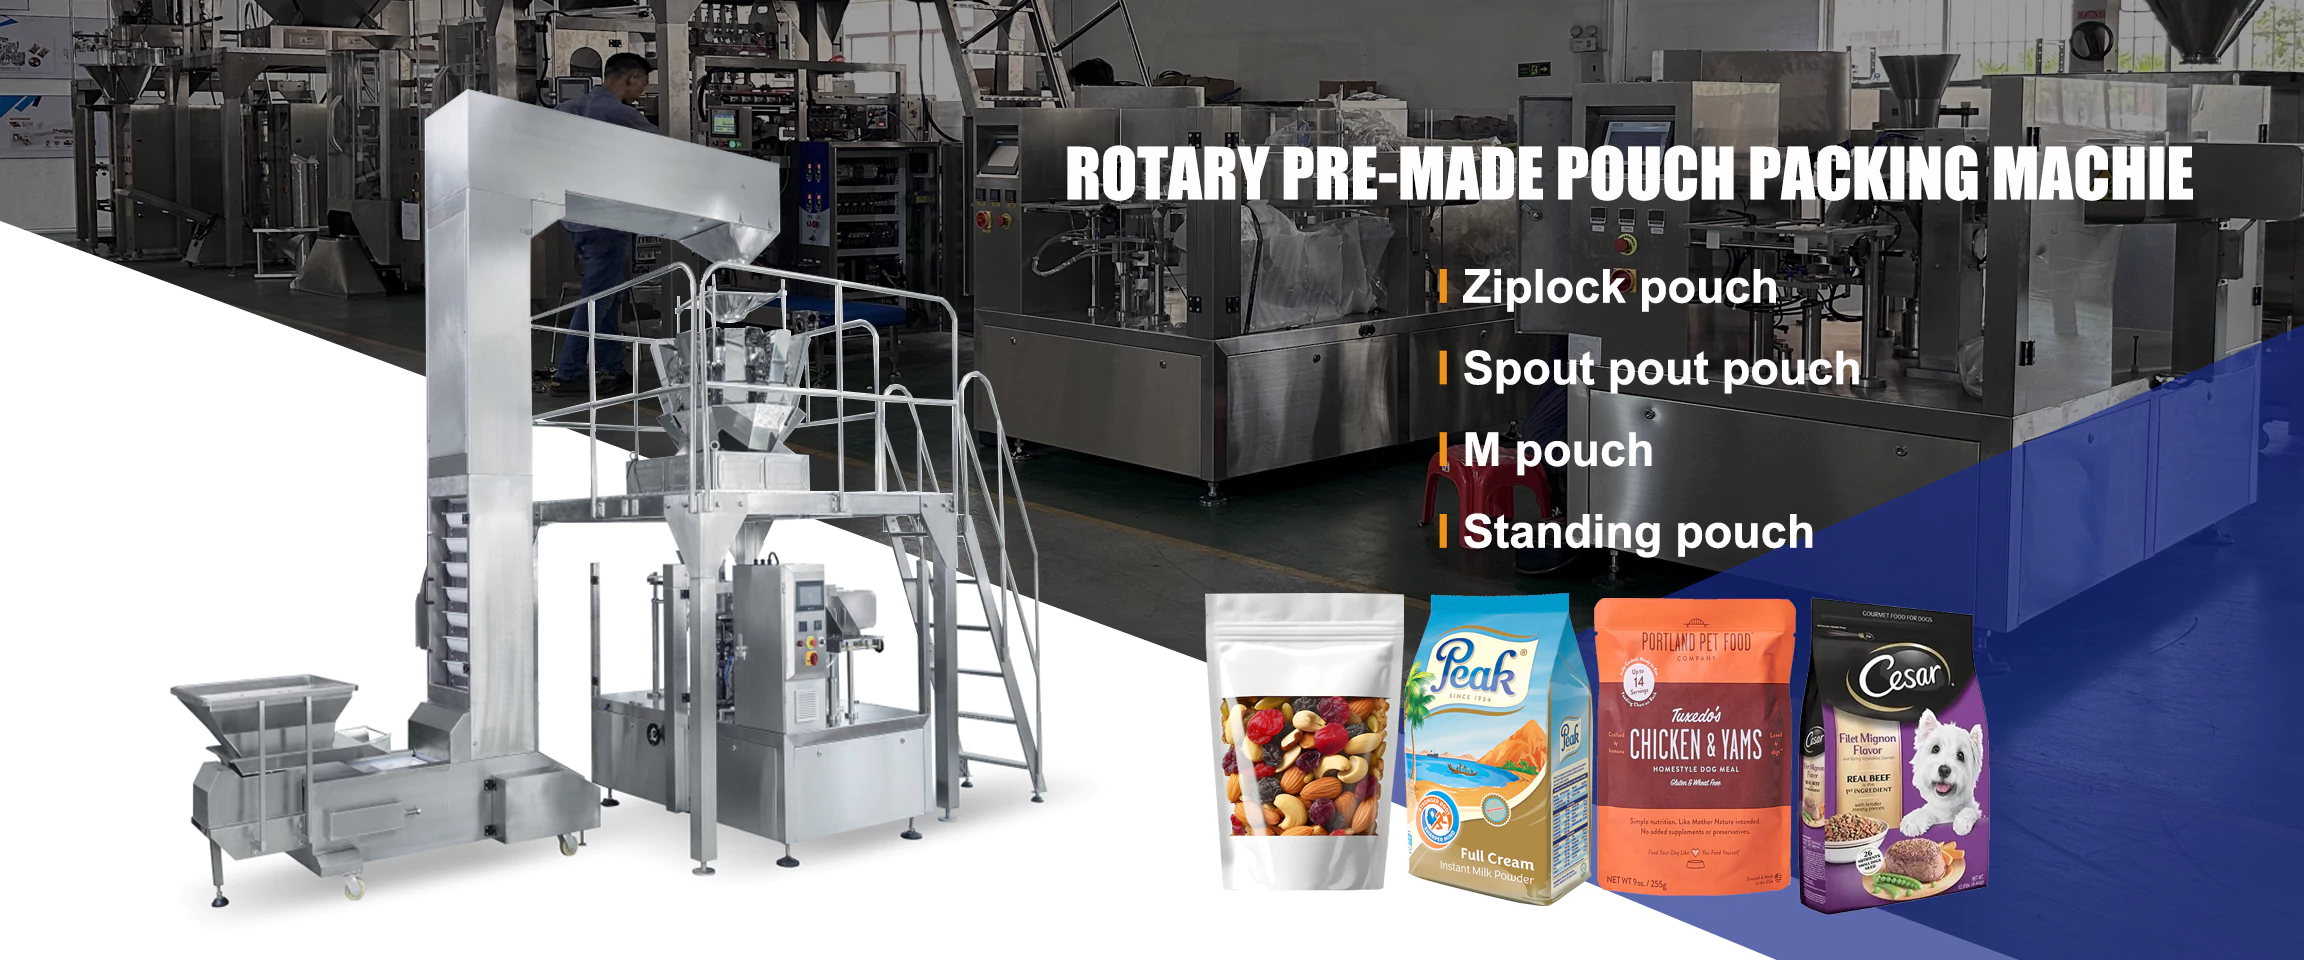 Rotary premade pouch doy pack machine